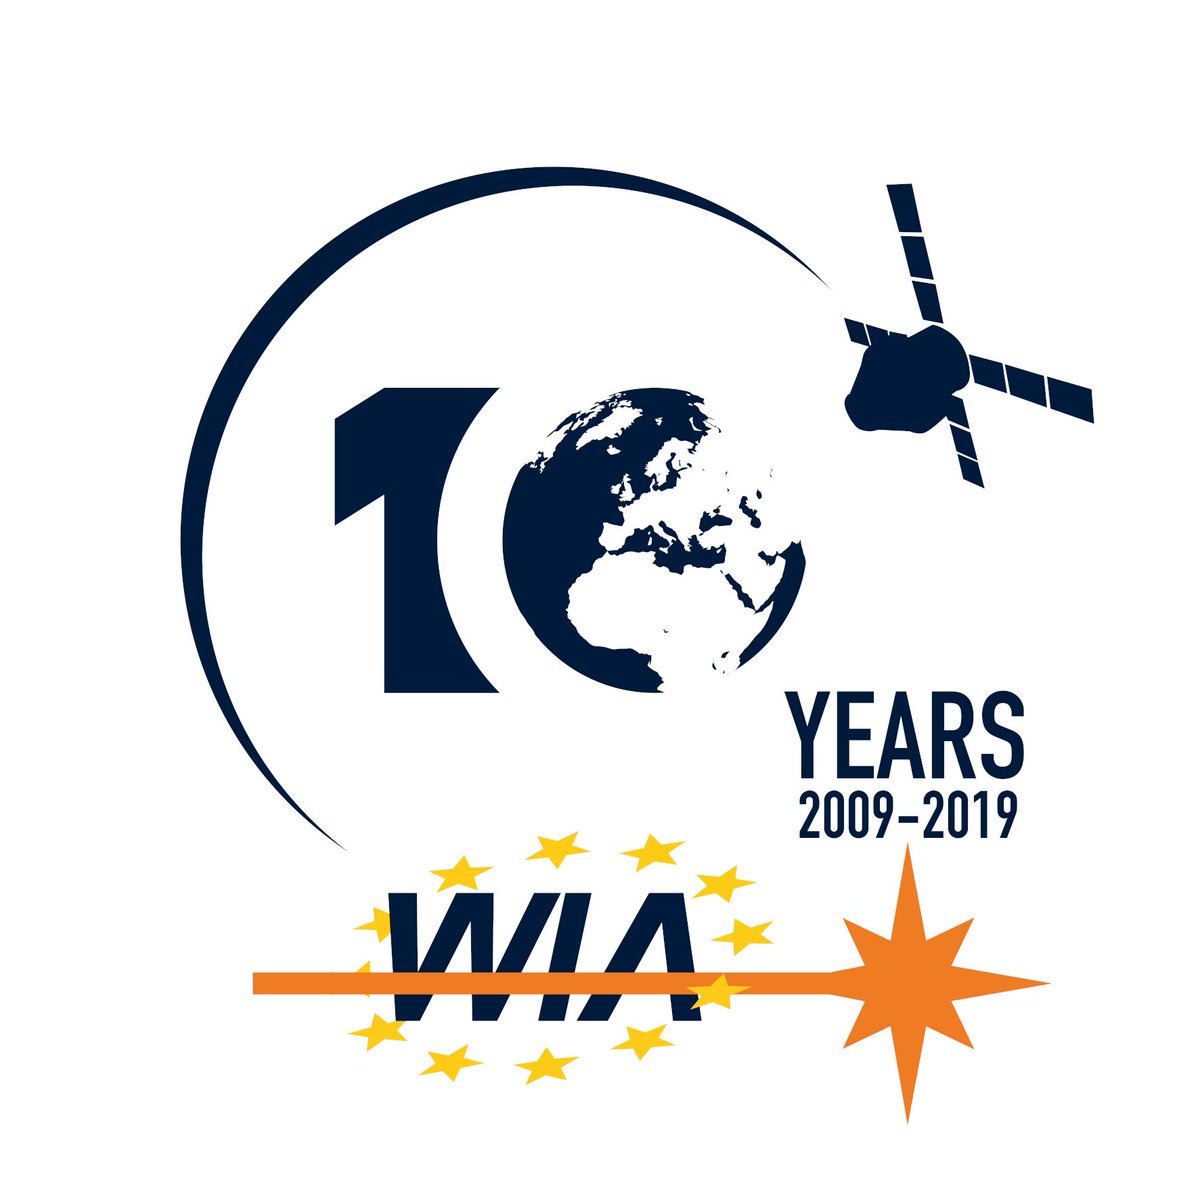 Women In Aerospace Europe Happy Birthday Women In Aerospace Europe 12 June 09 19 10 Years And We Re Growing Stronger Than Ever Supporting And Supported By Many